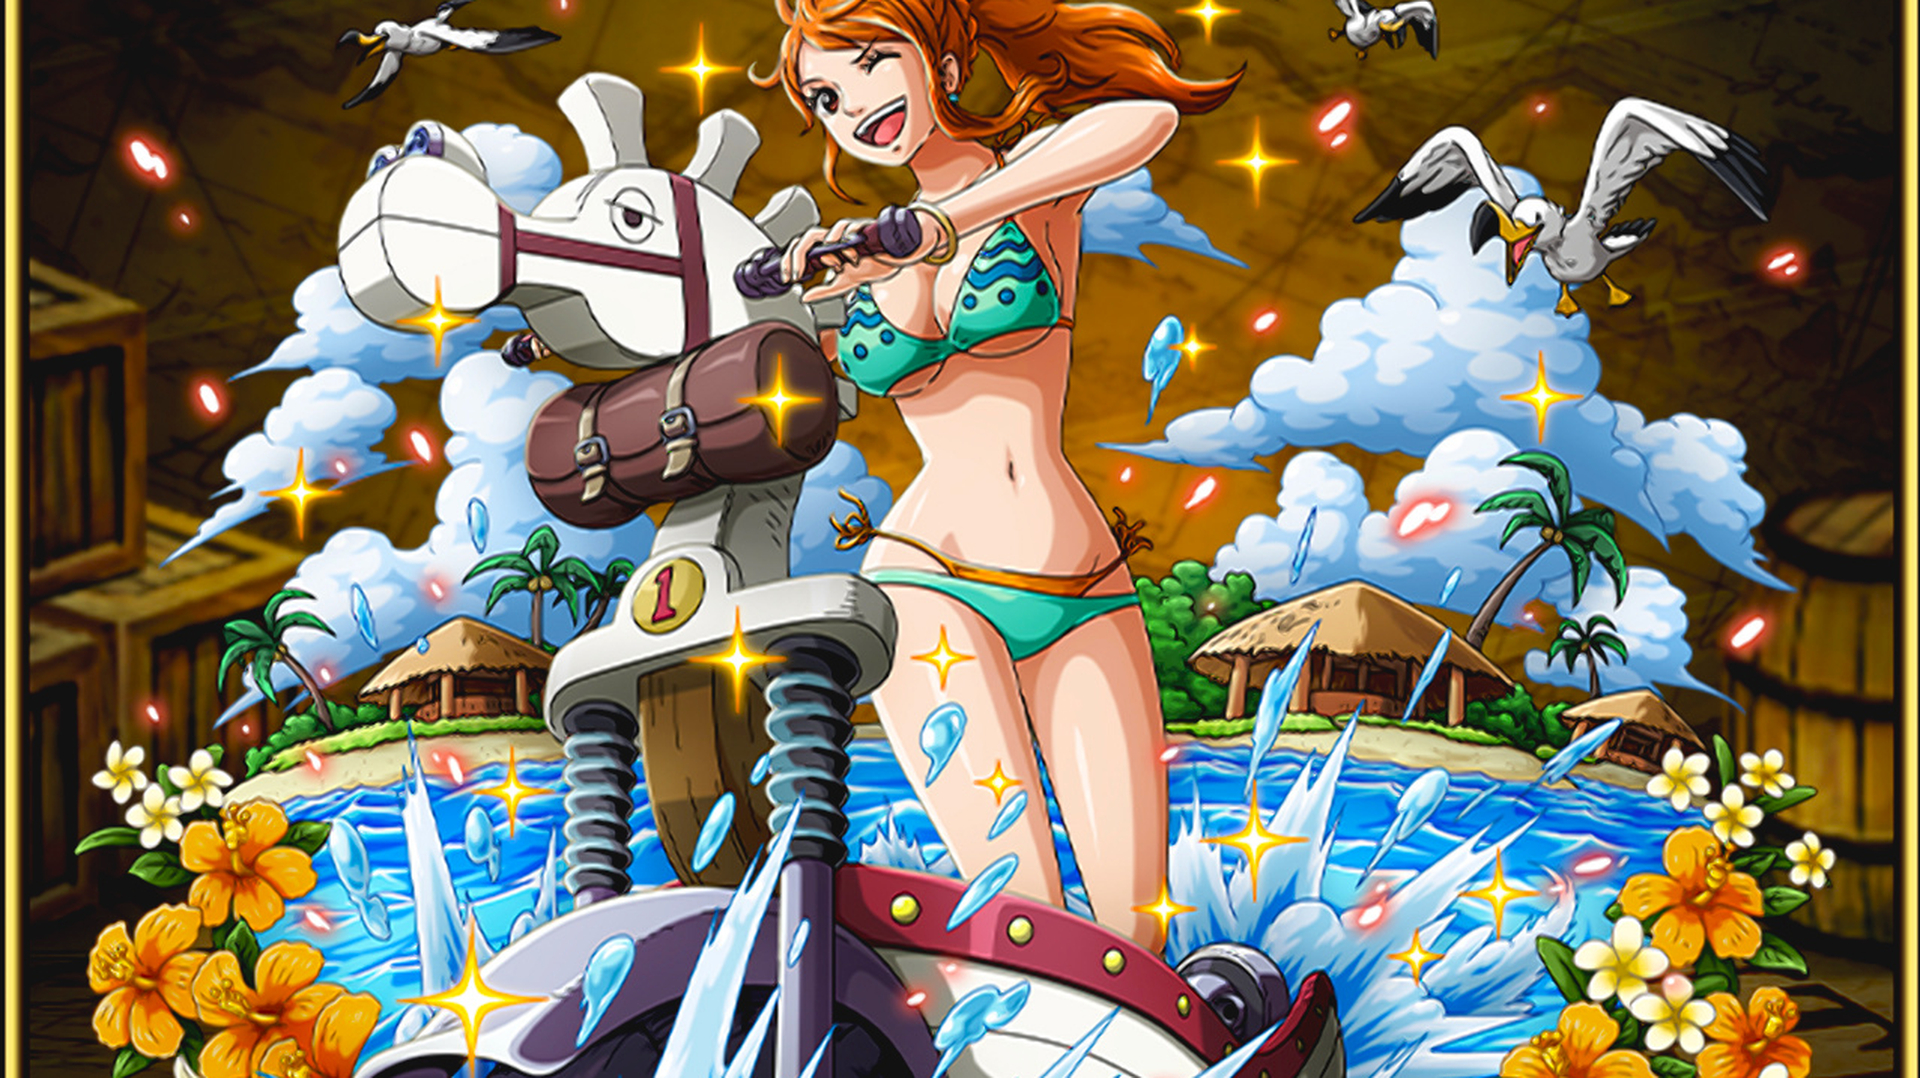 Anime One Piece Picture - Image Abyss.